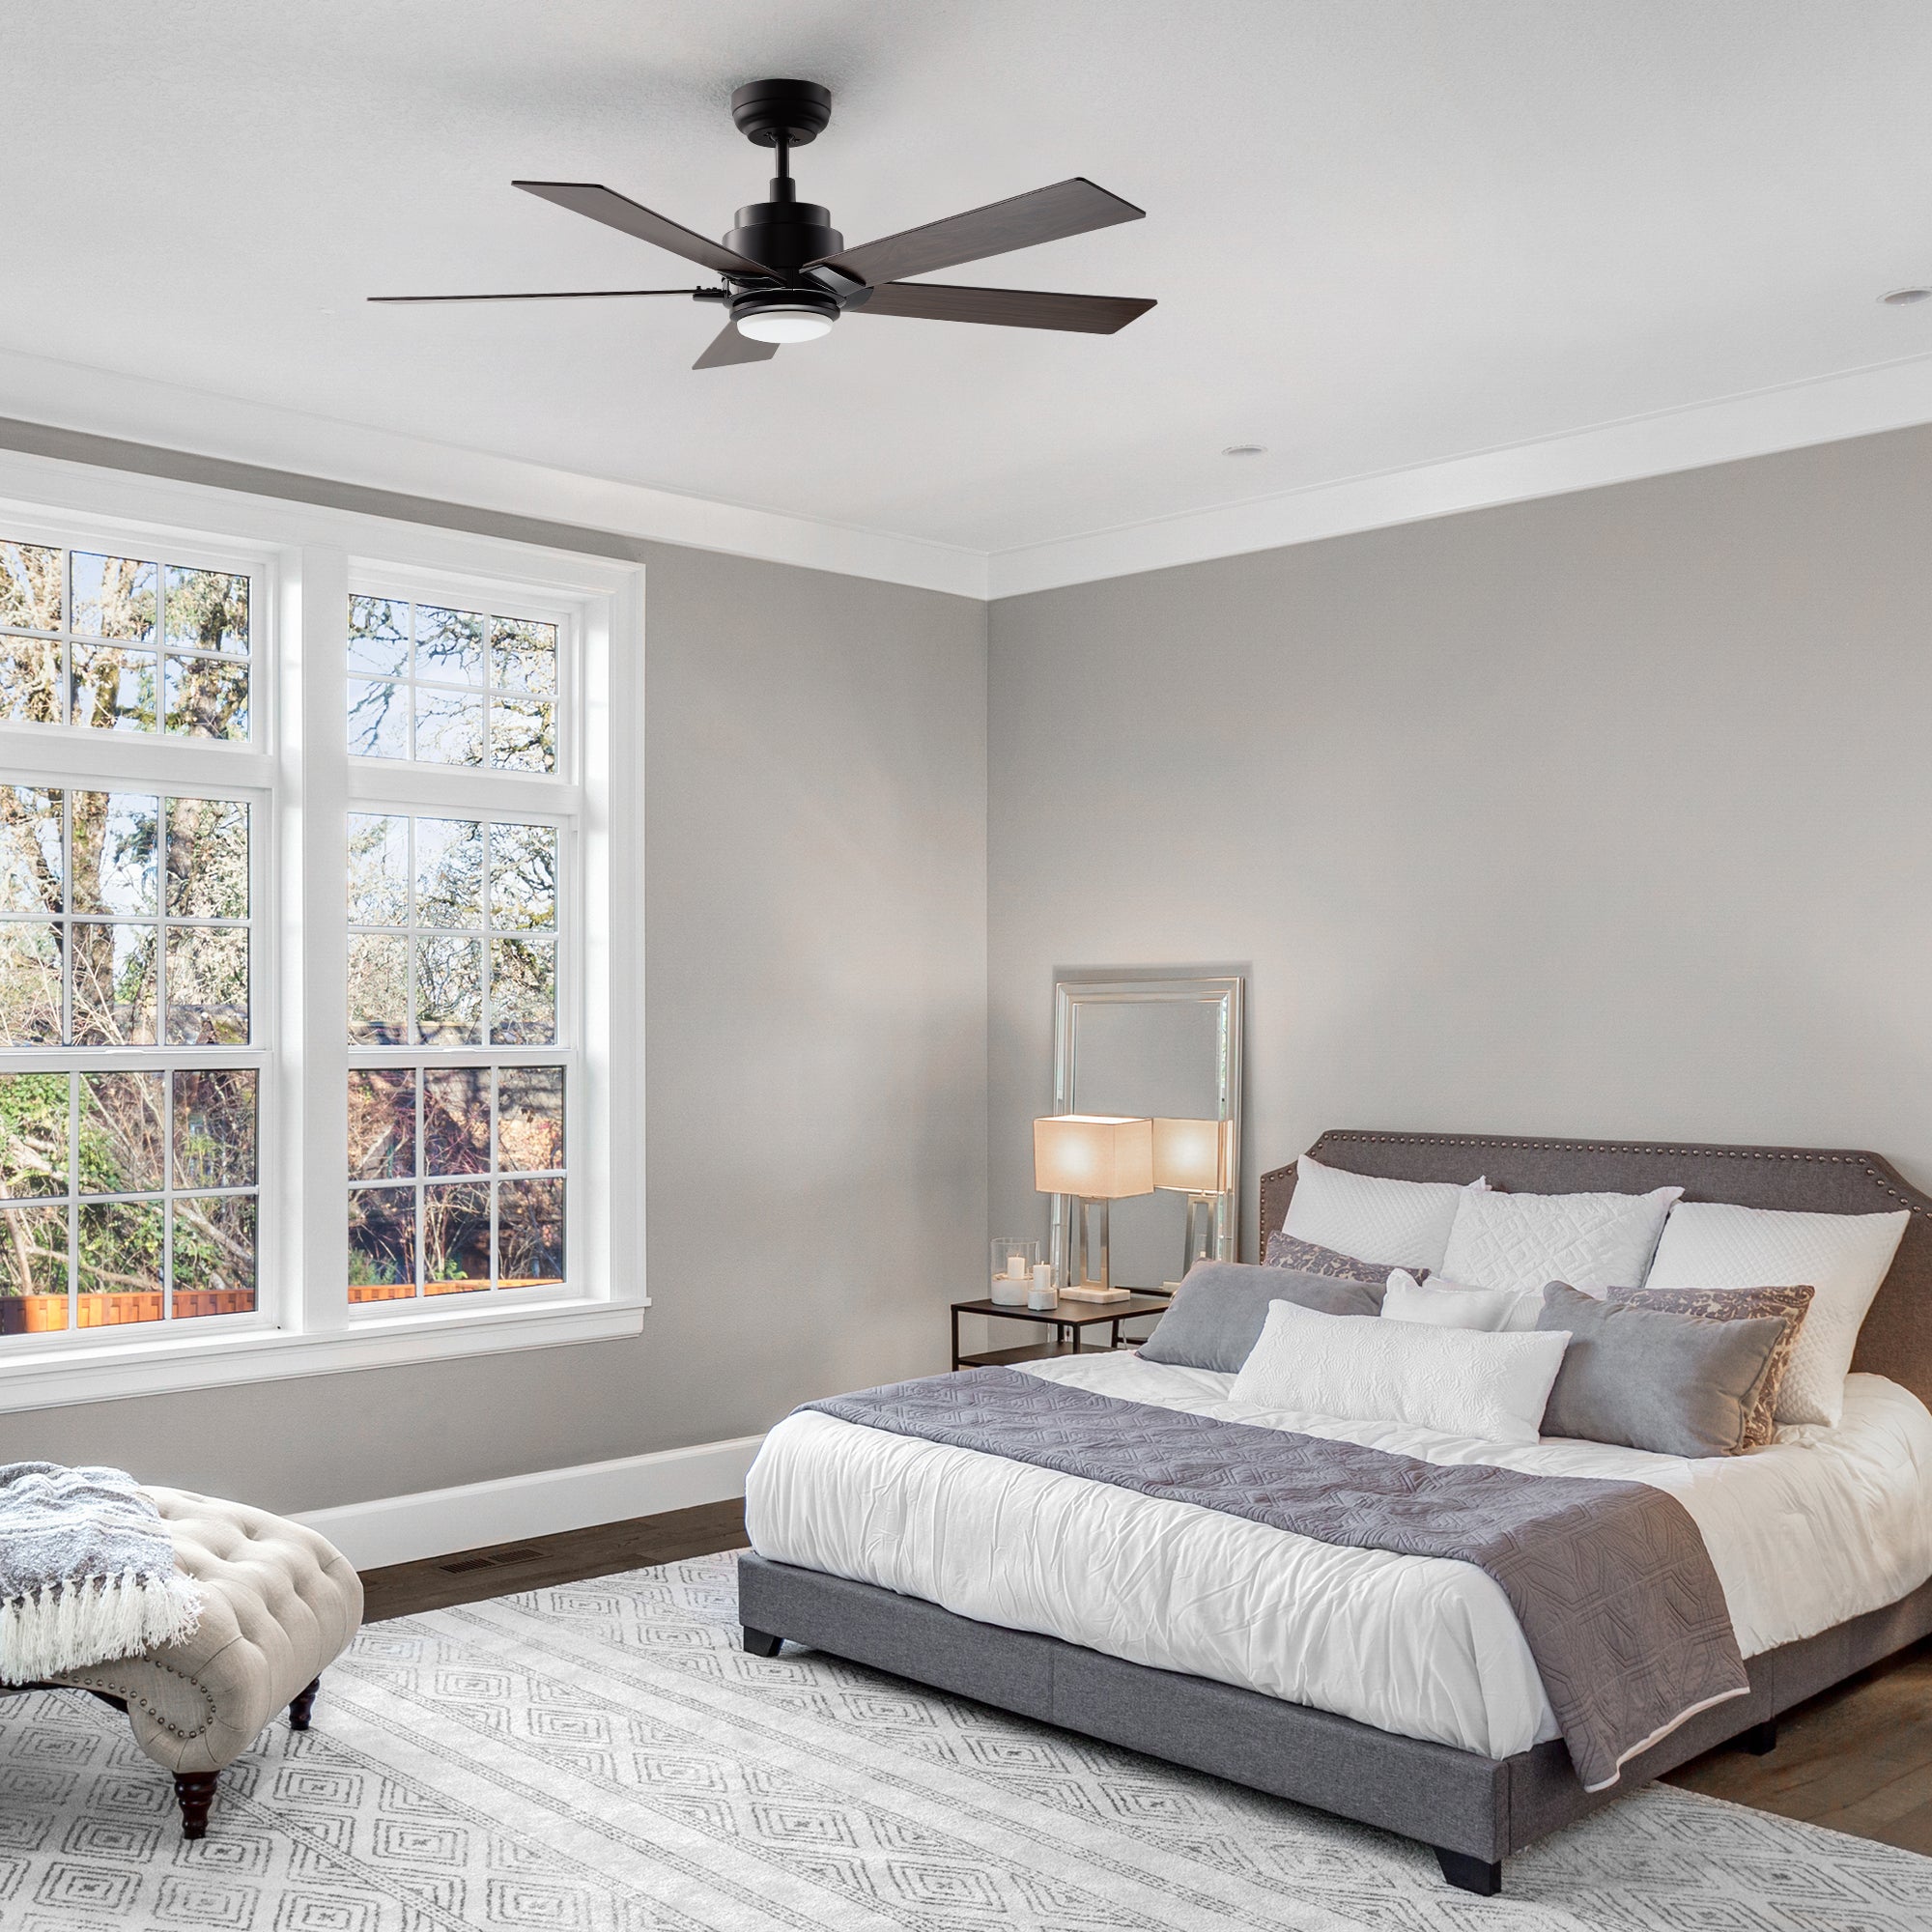 Carro ASPEN outdoor ceiling fan with 5 blades, dark wood design, and an 6-in extended rod, decor in a bedroom. 